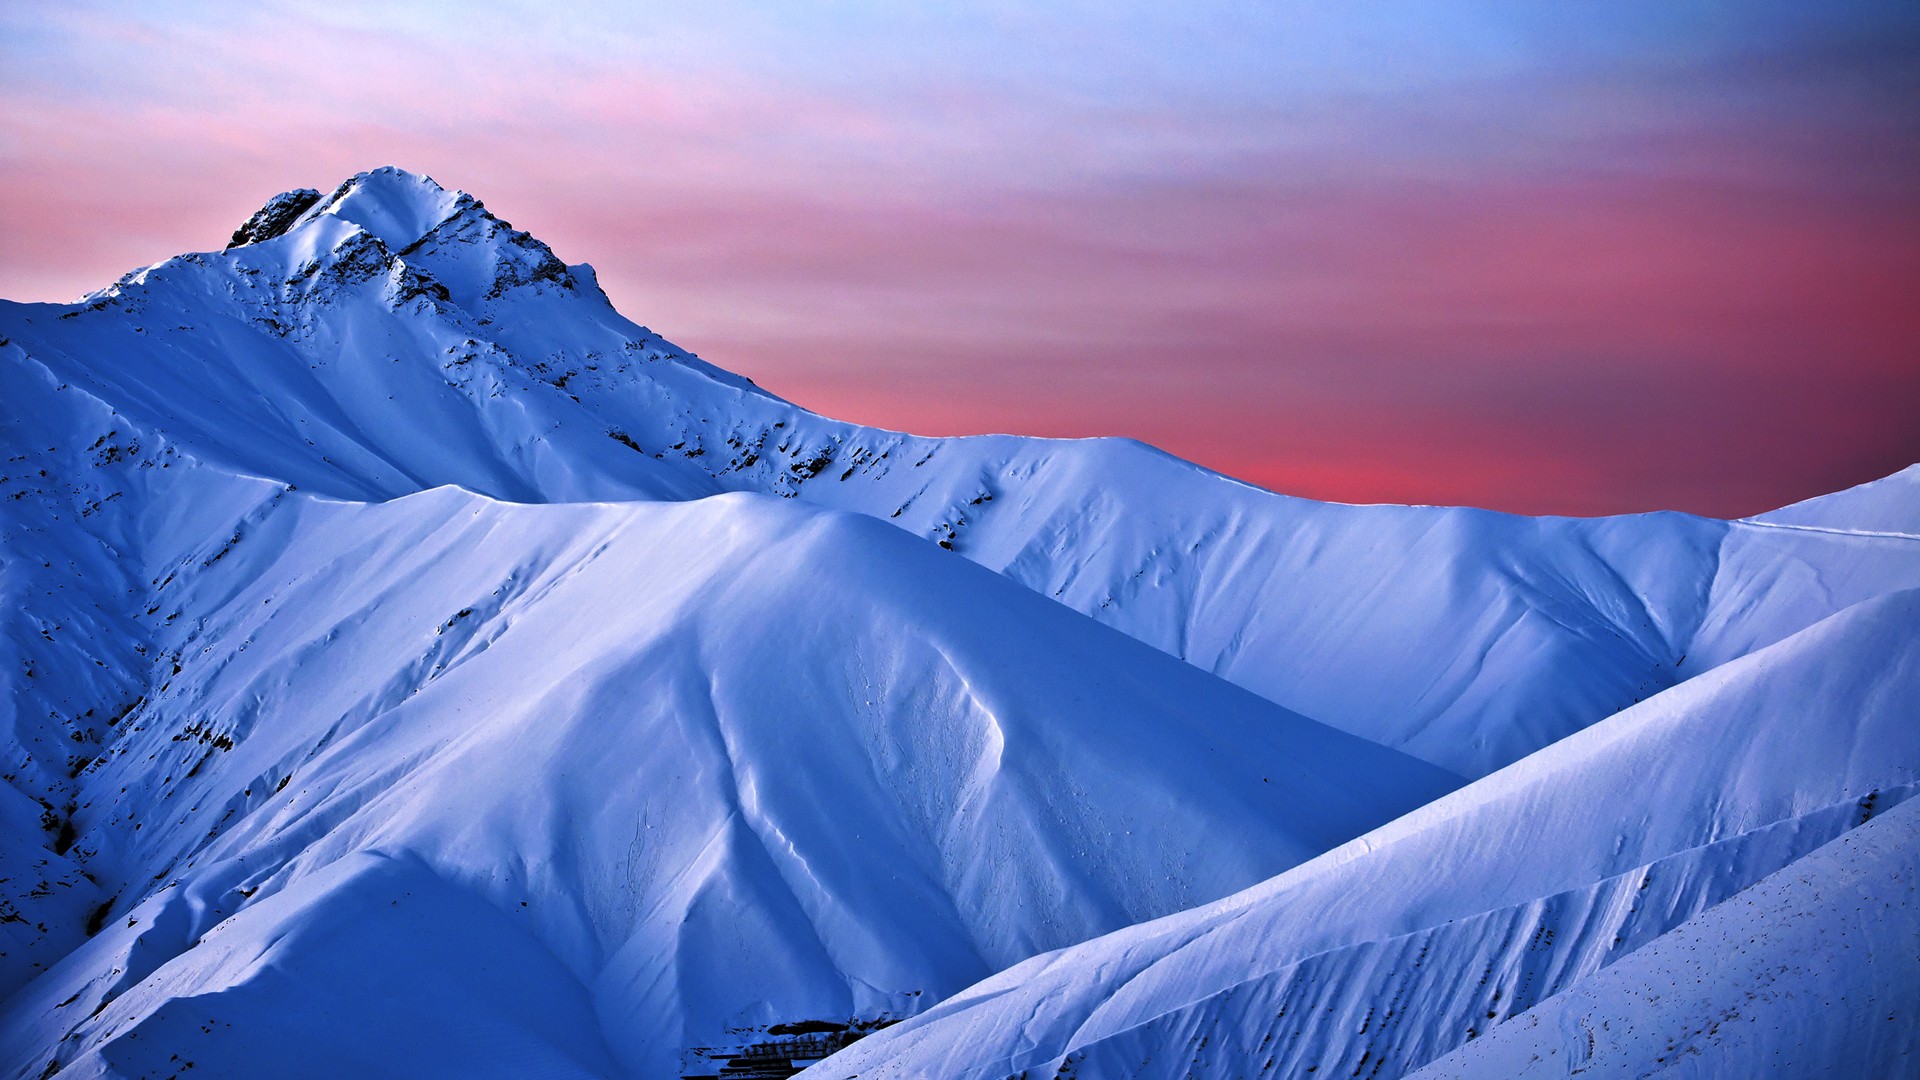 General 1920x1080 ice snow mountains nature landscape snowy peak snowy mountain